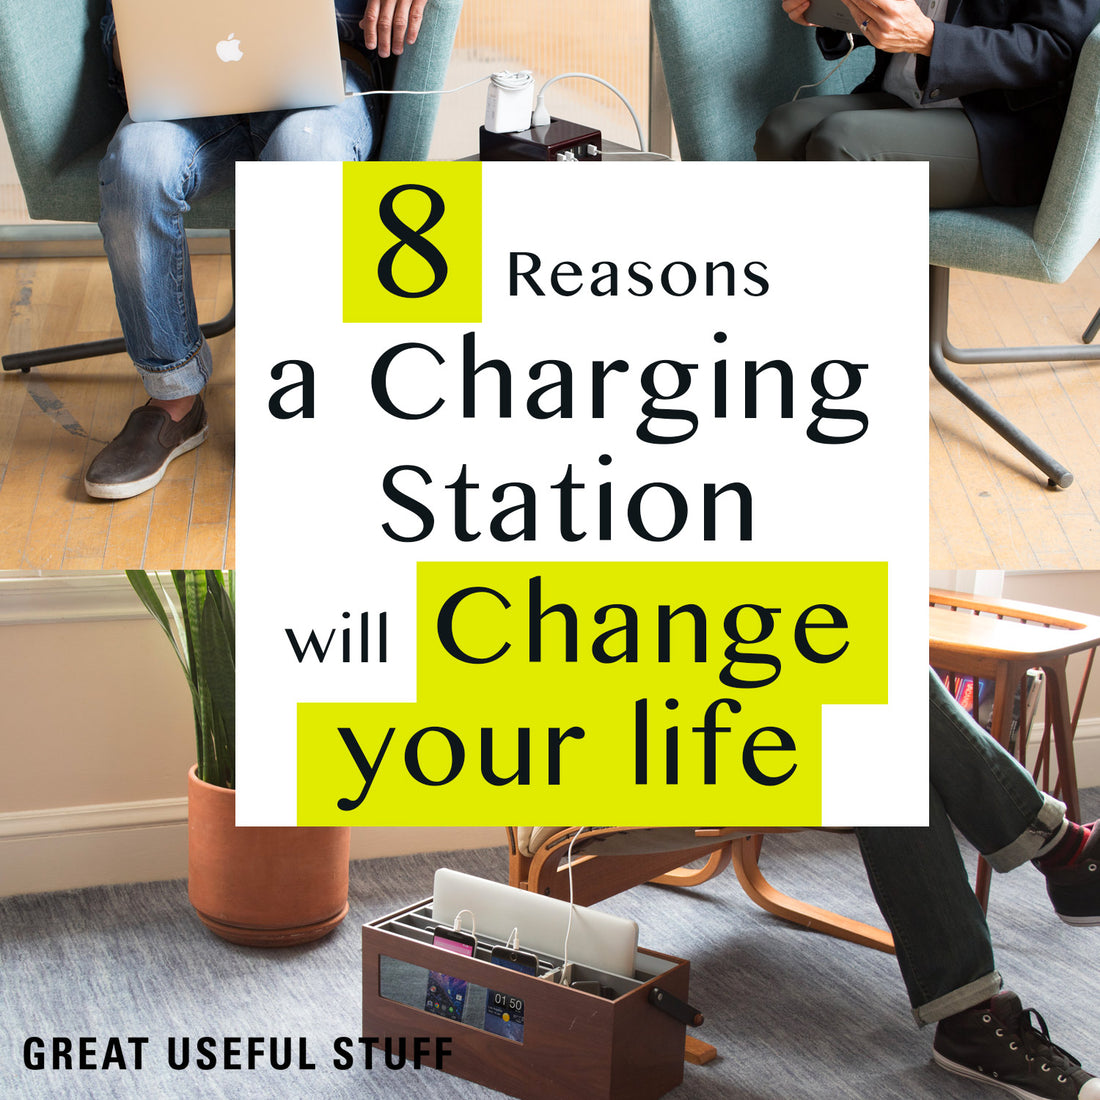 8 Reasons a Charging Station will Change your Life